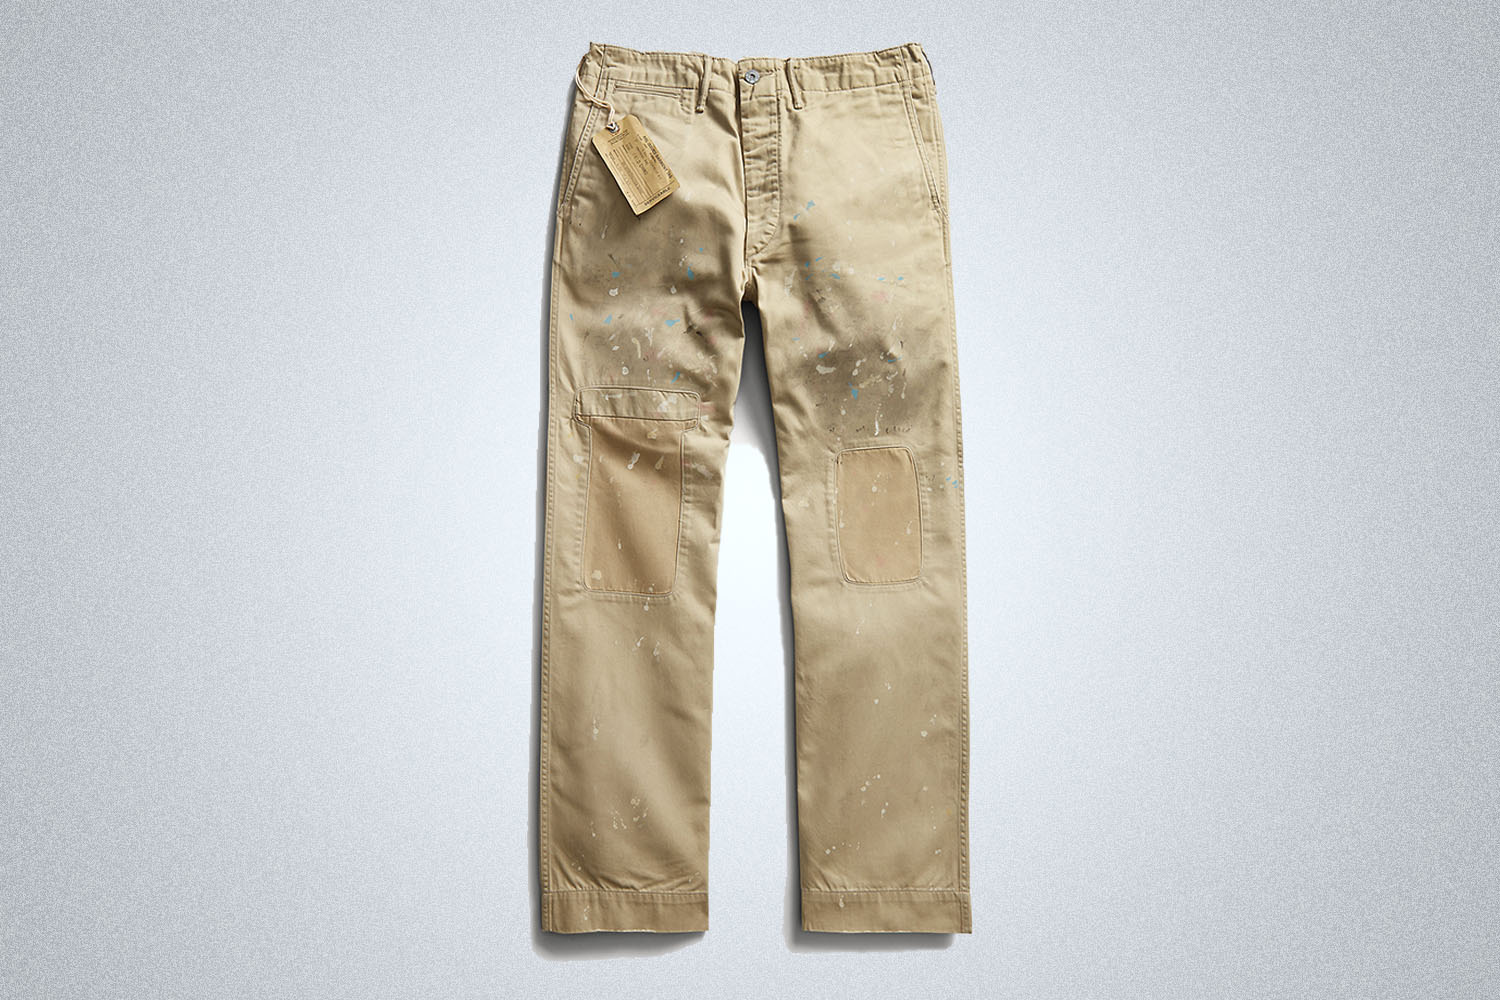 a pair of dirstressed chinos from RRL on a grey background